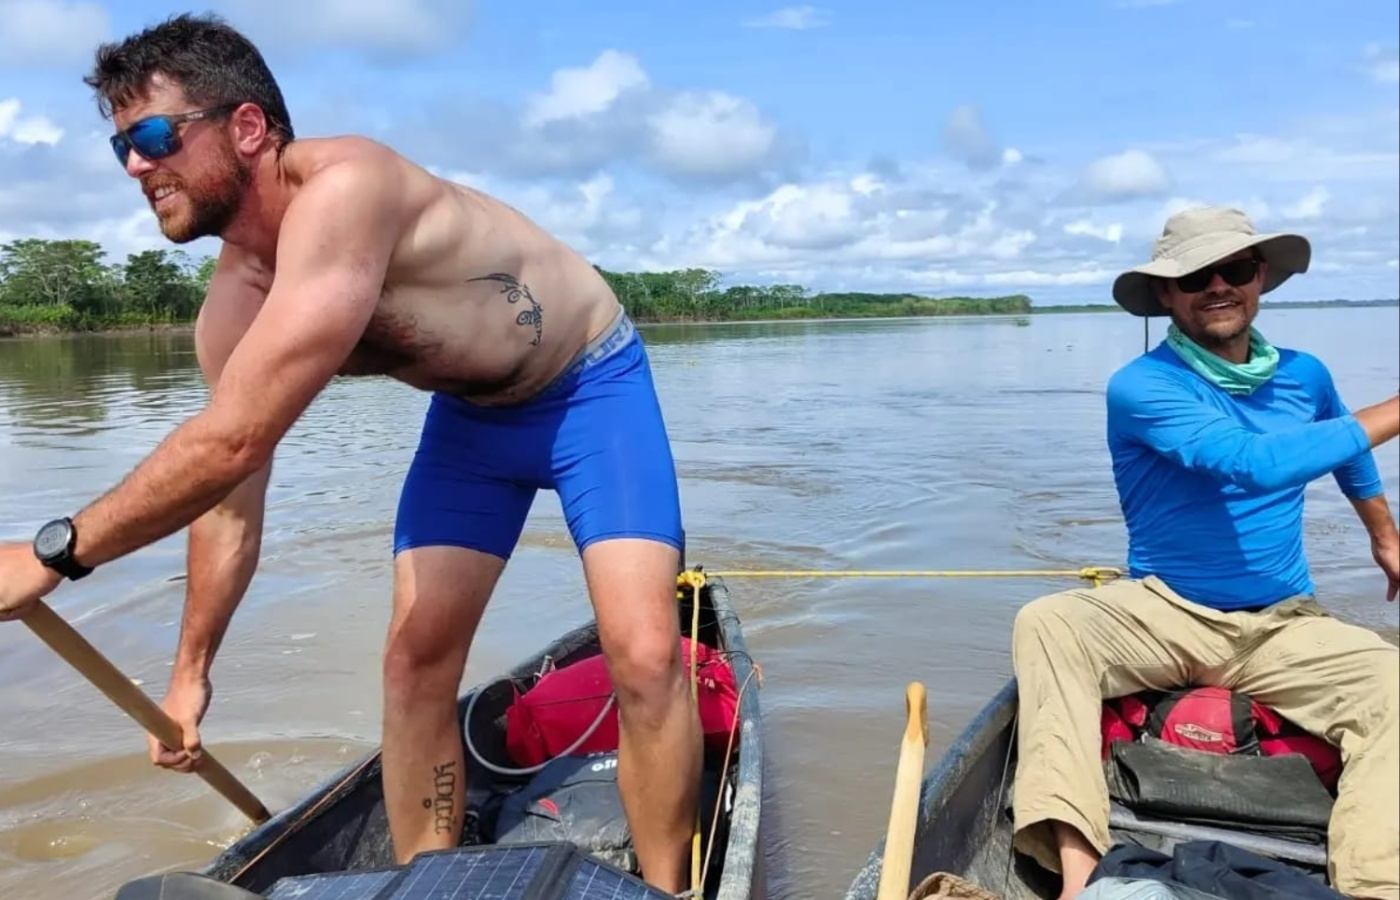 John Bathgate and Jake Morley during their Amazon river expedition.